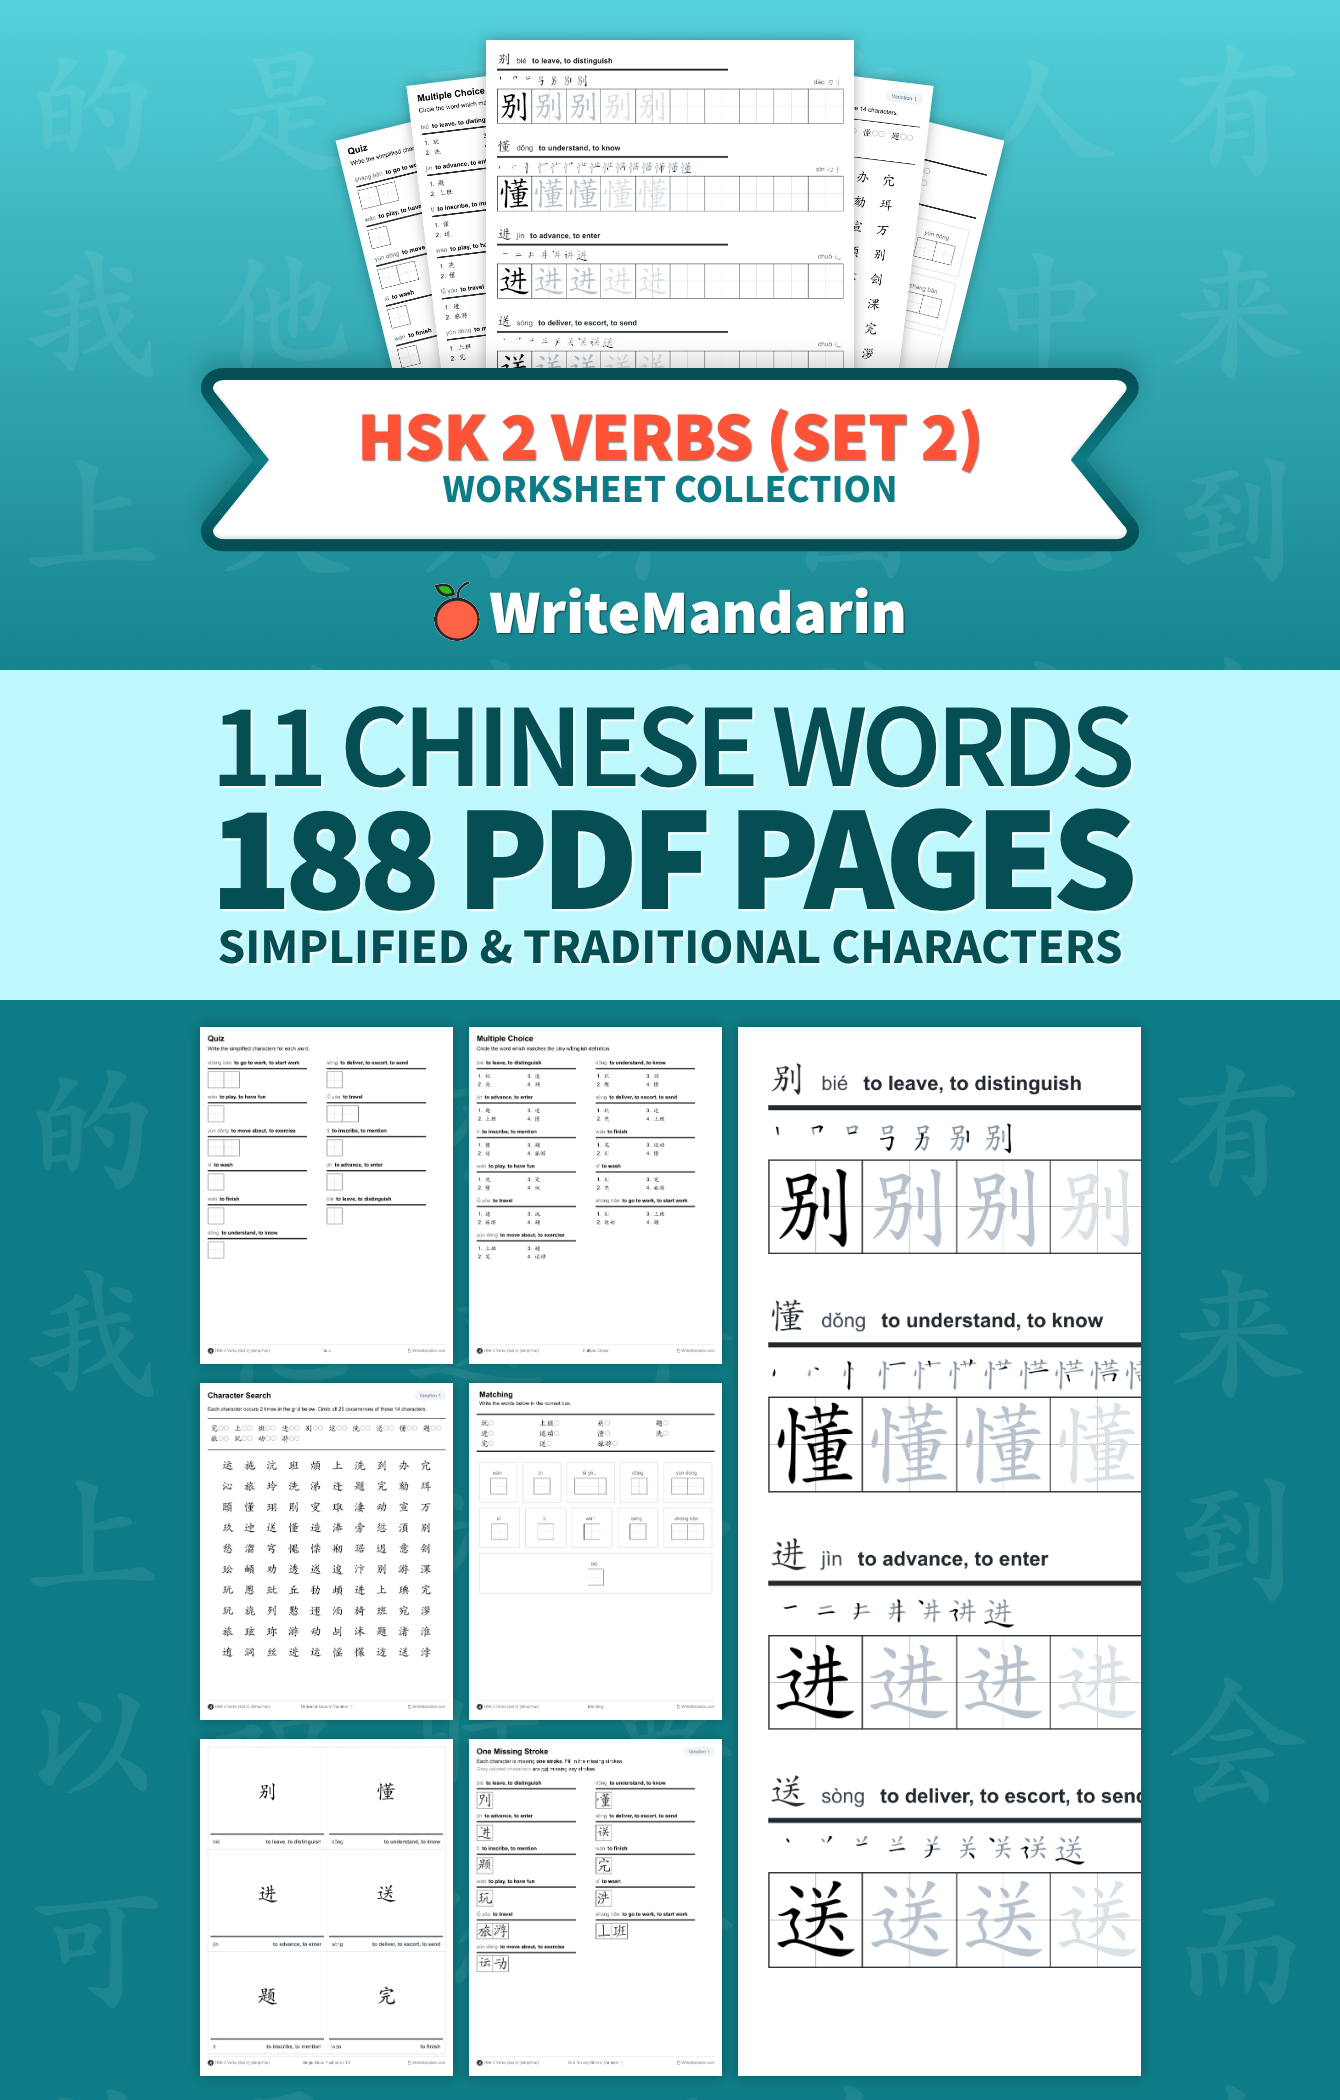 Preview image of HSK 2 Verbs (Set 2) worksheet collection